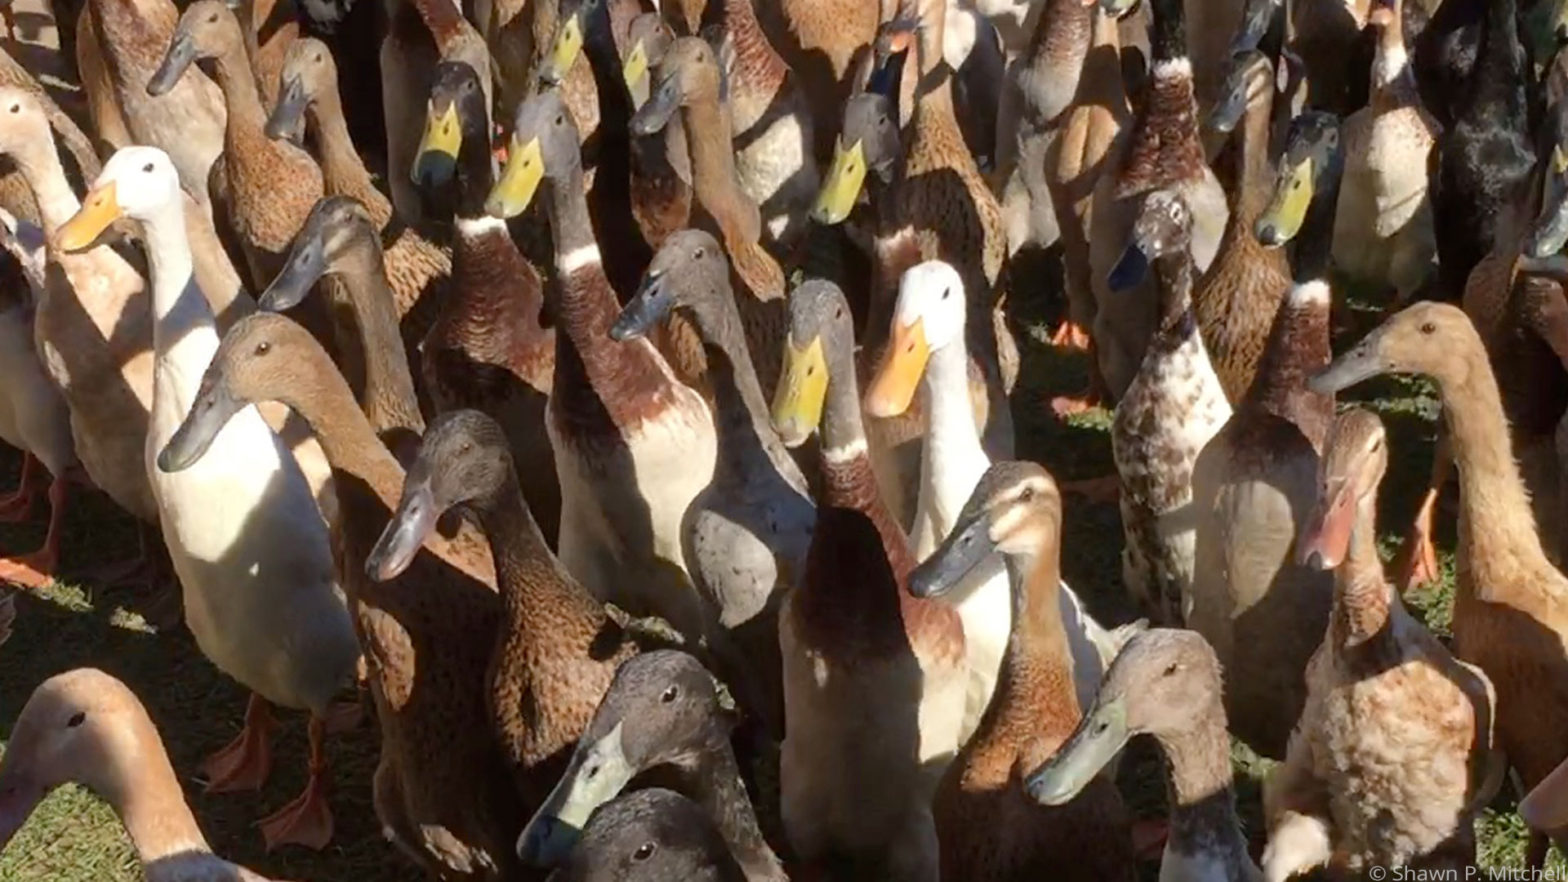 A gaggles of ducks in South Africa.